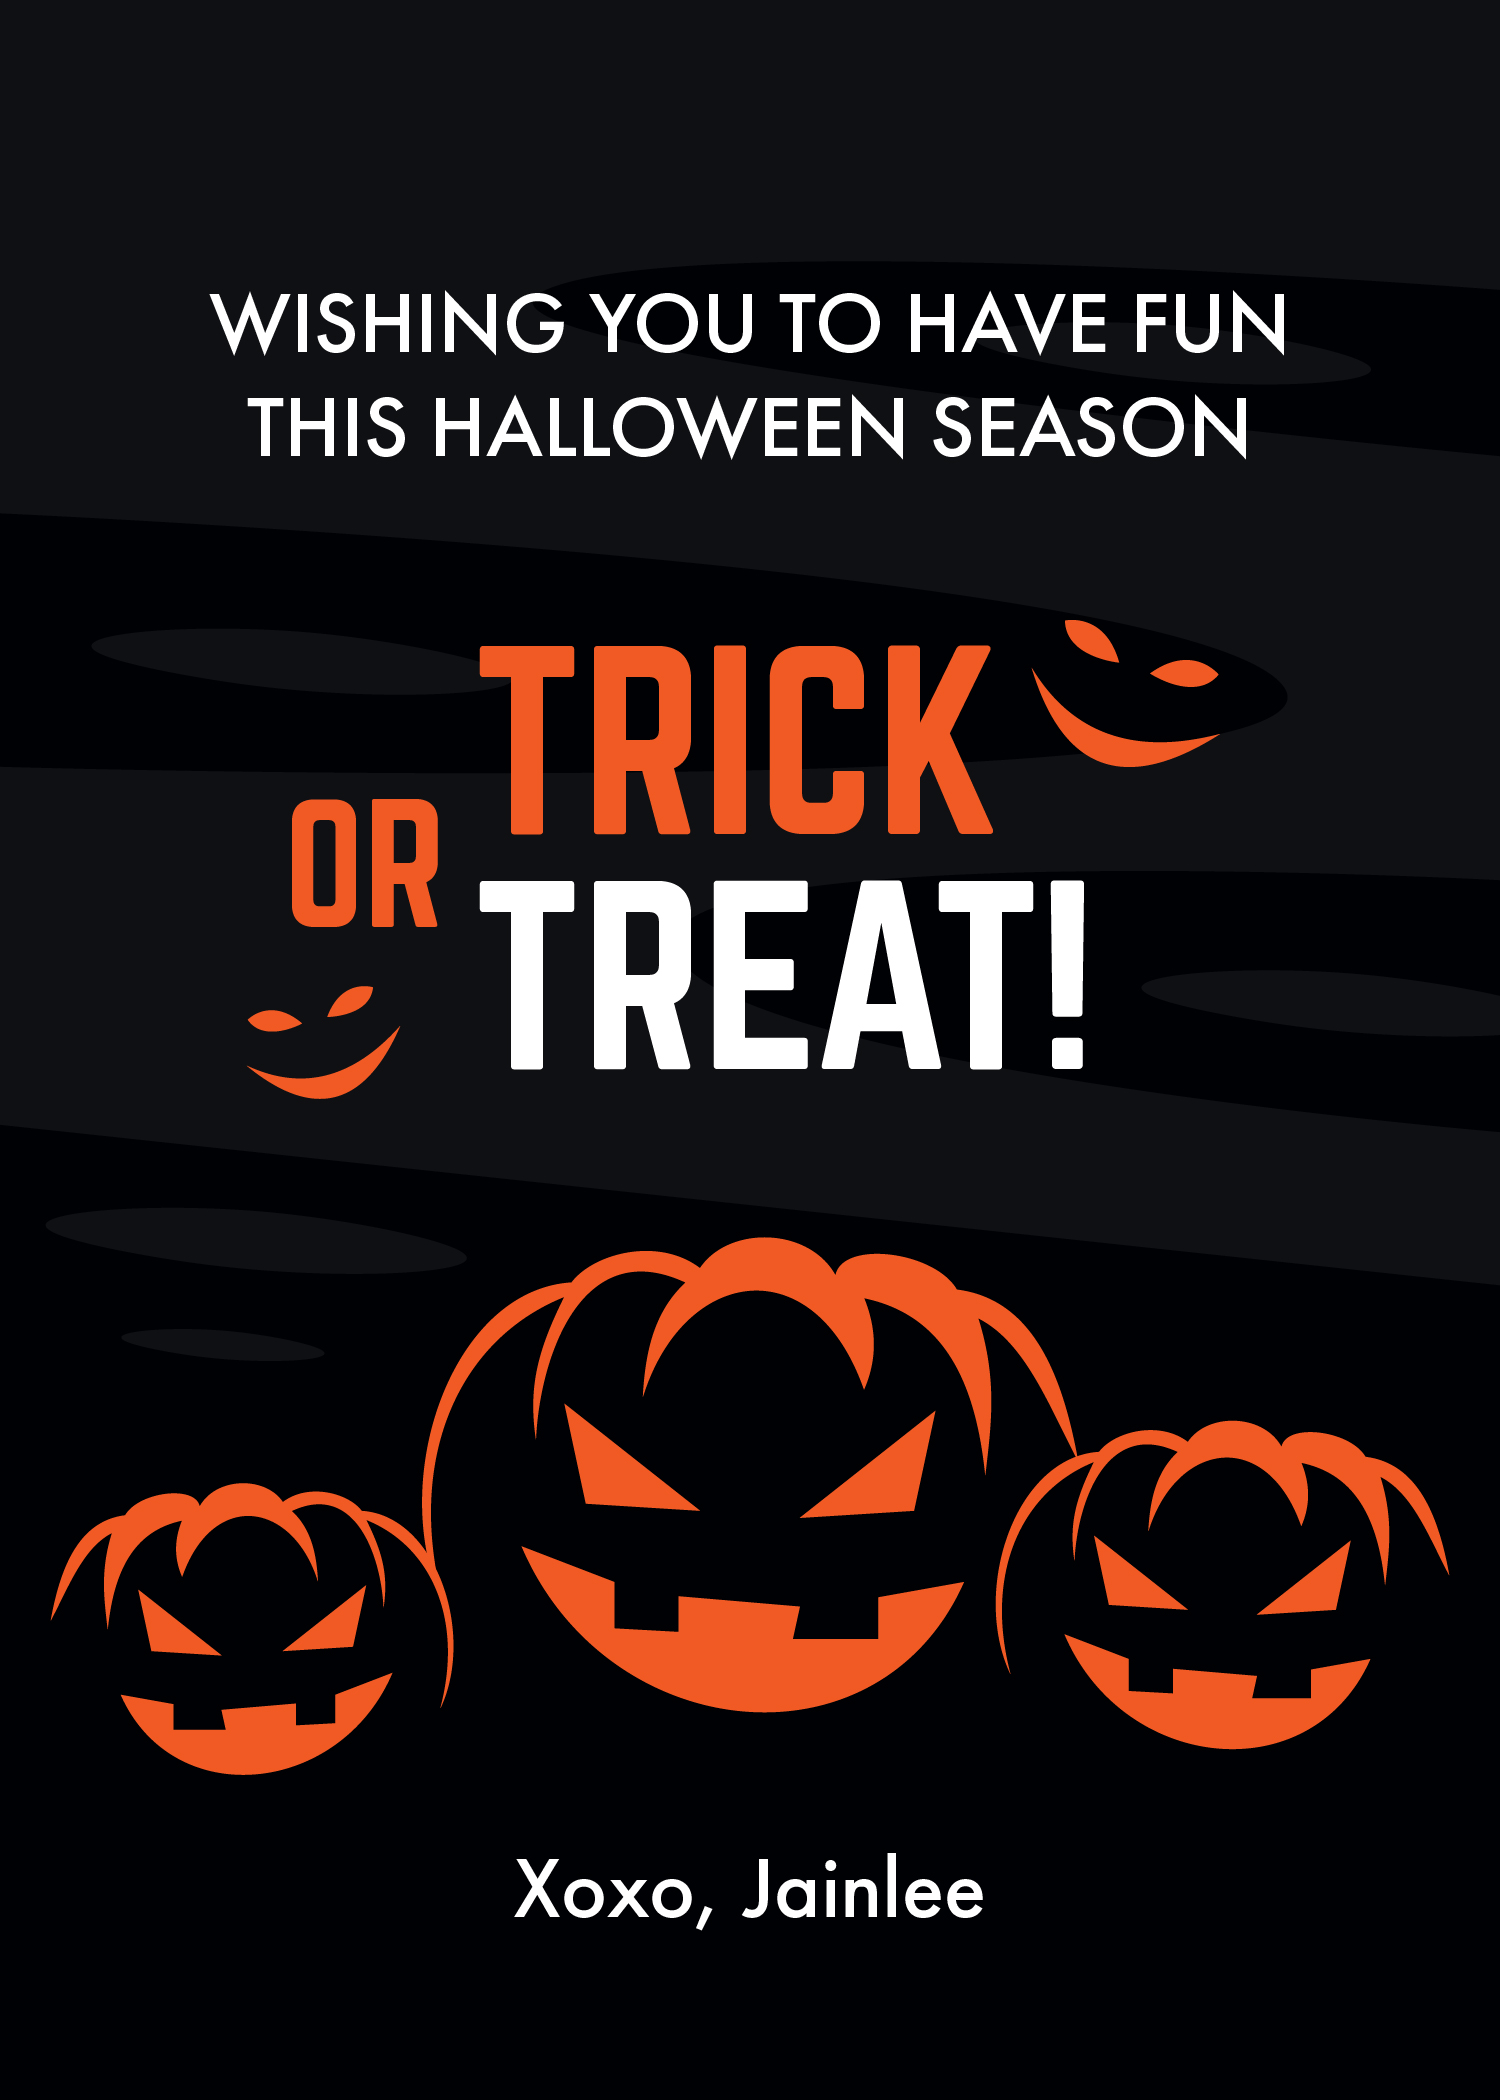 Free Halloween Wishes For Friend in Word, Google Docs, Illustrator, PSD, EPS, SVG, JPG, PNG